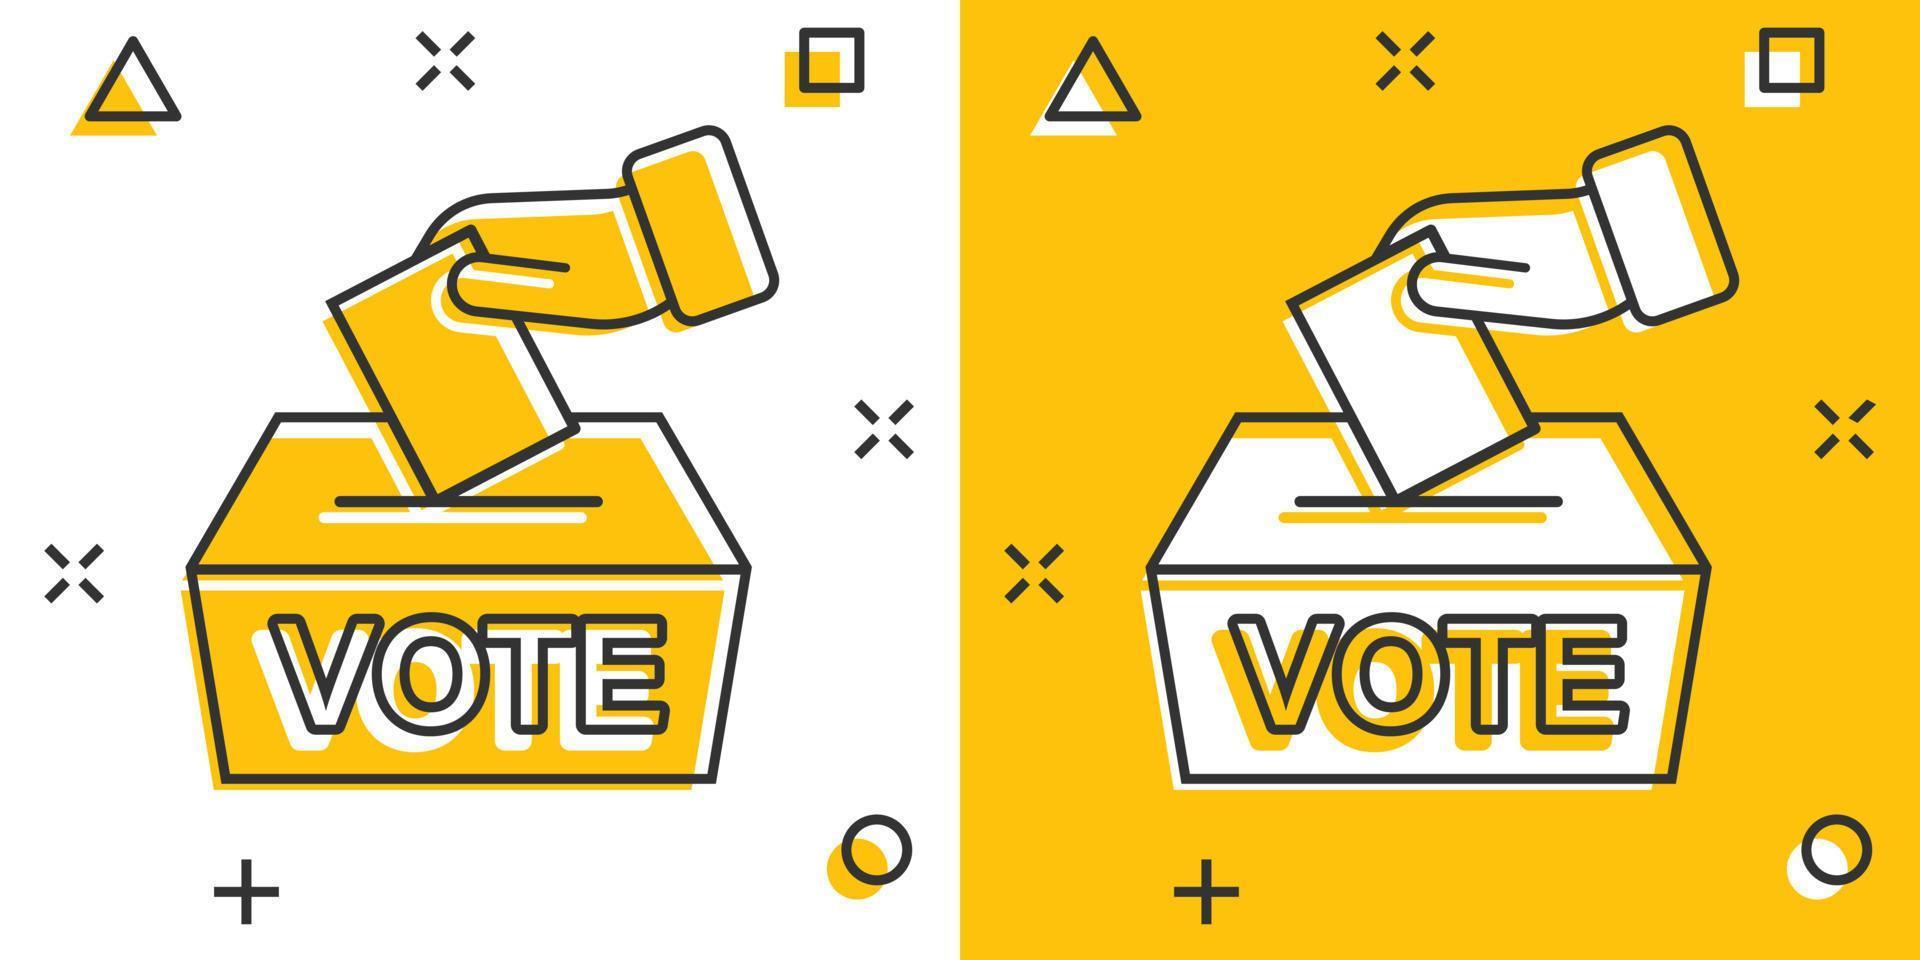 Vote icon in comic style. Ballot box cartoon vector illustration on white isolated background. Election splash effect business concept.